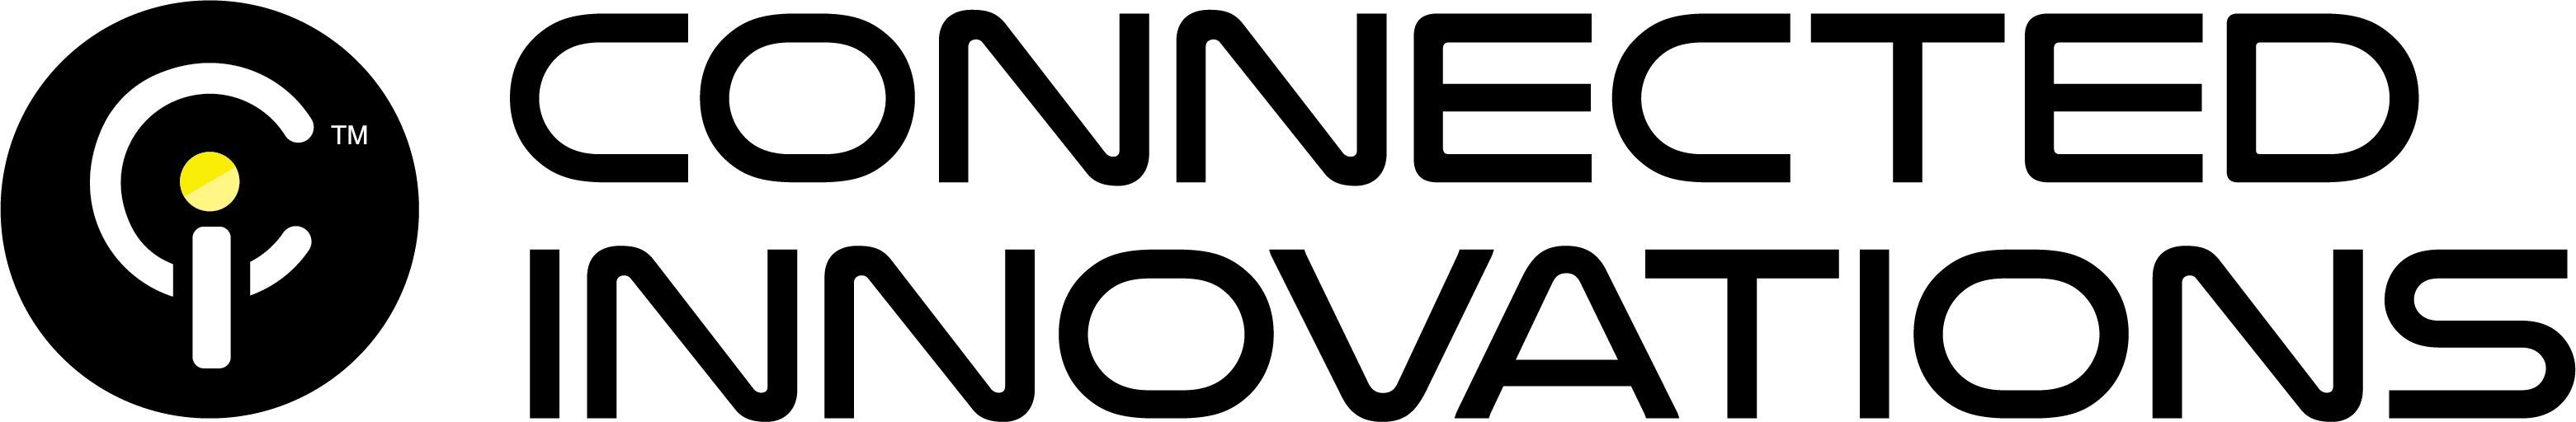 Connected Innovations logo